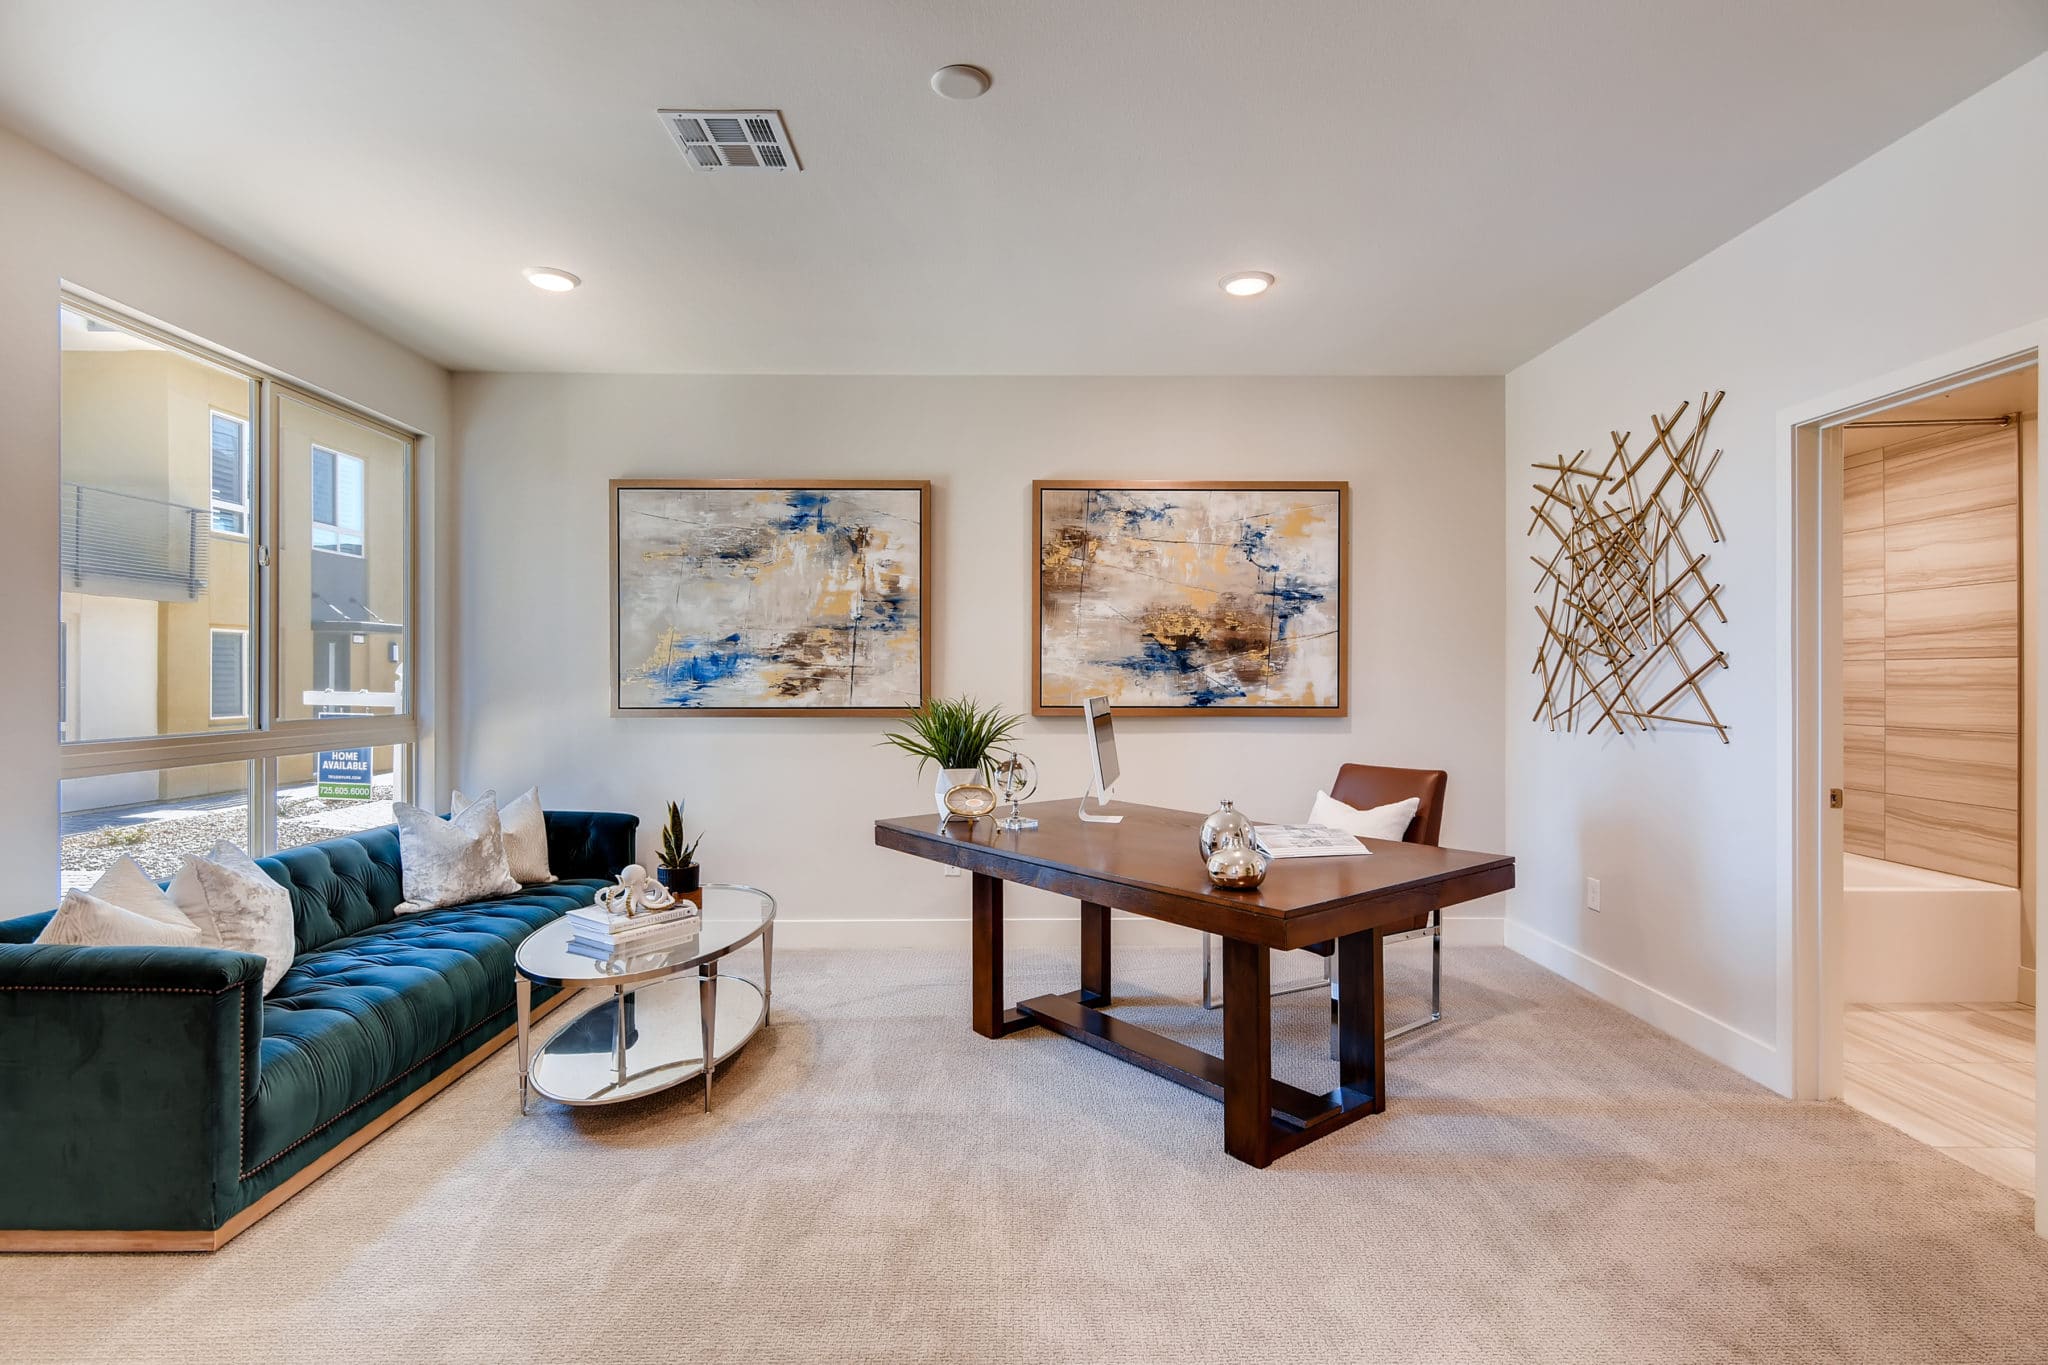 Guest Suite in Inspire in Modern Collection in Trilogy by Shea Homes in South Square in Summerlin